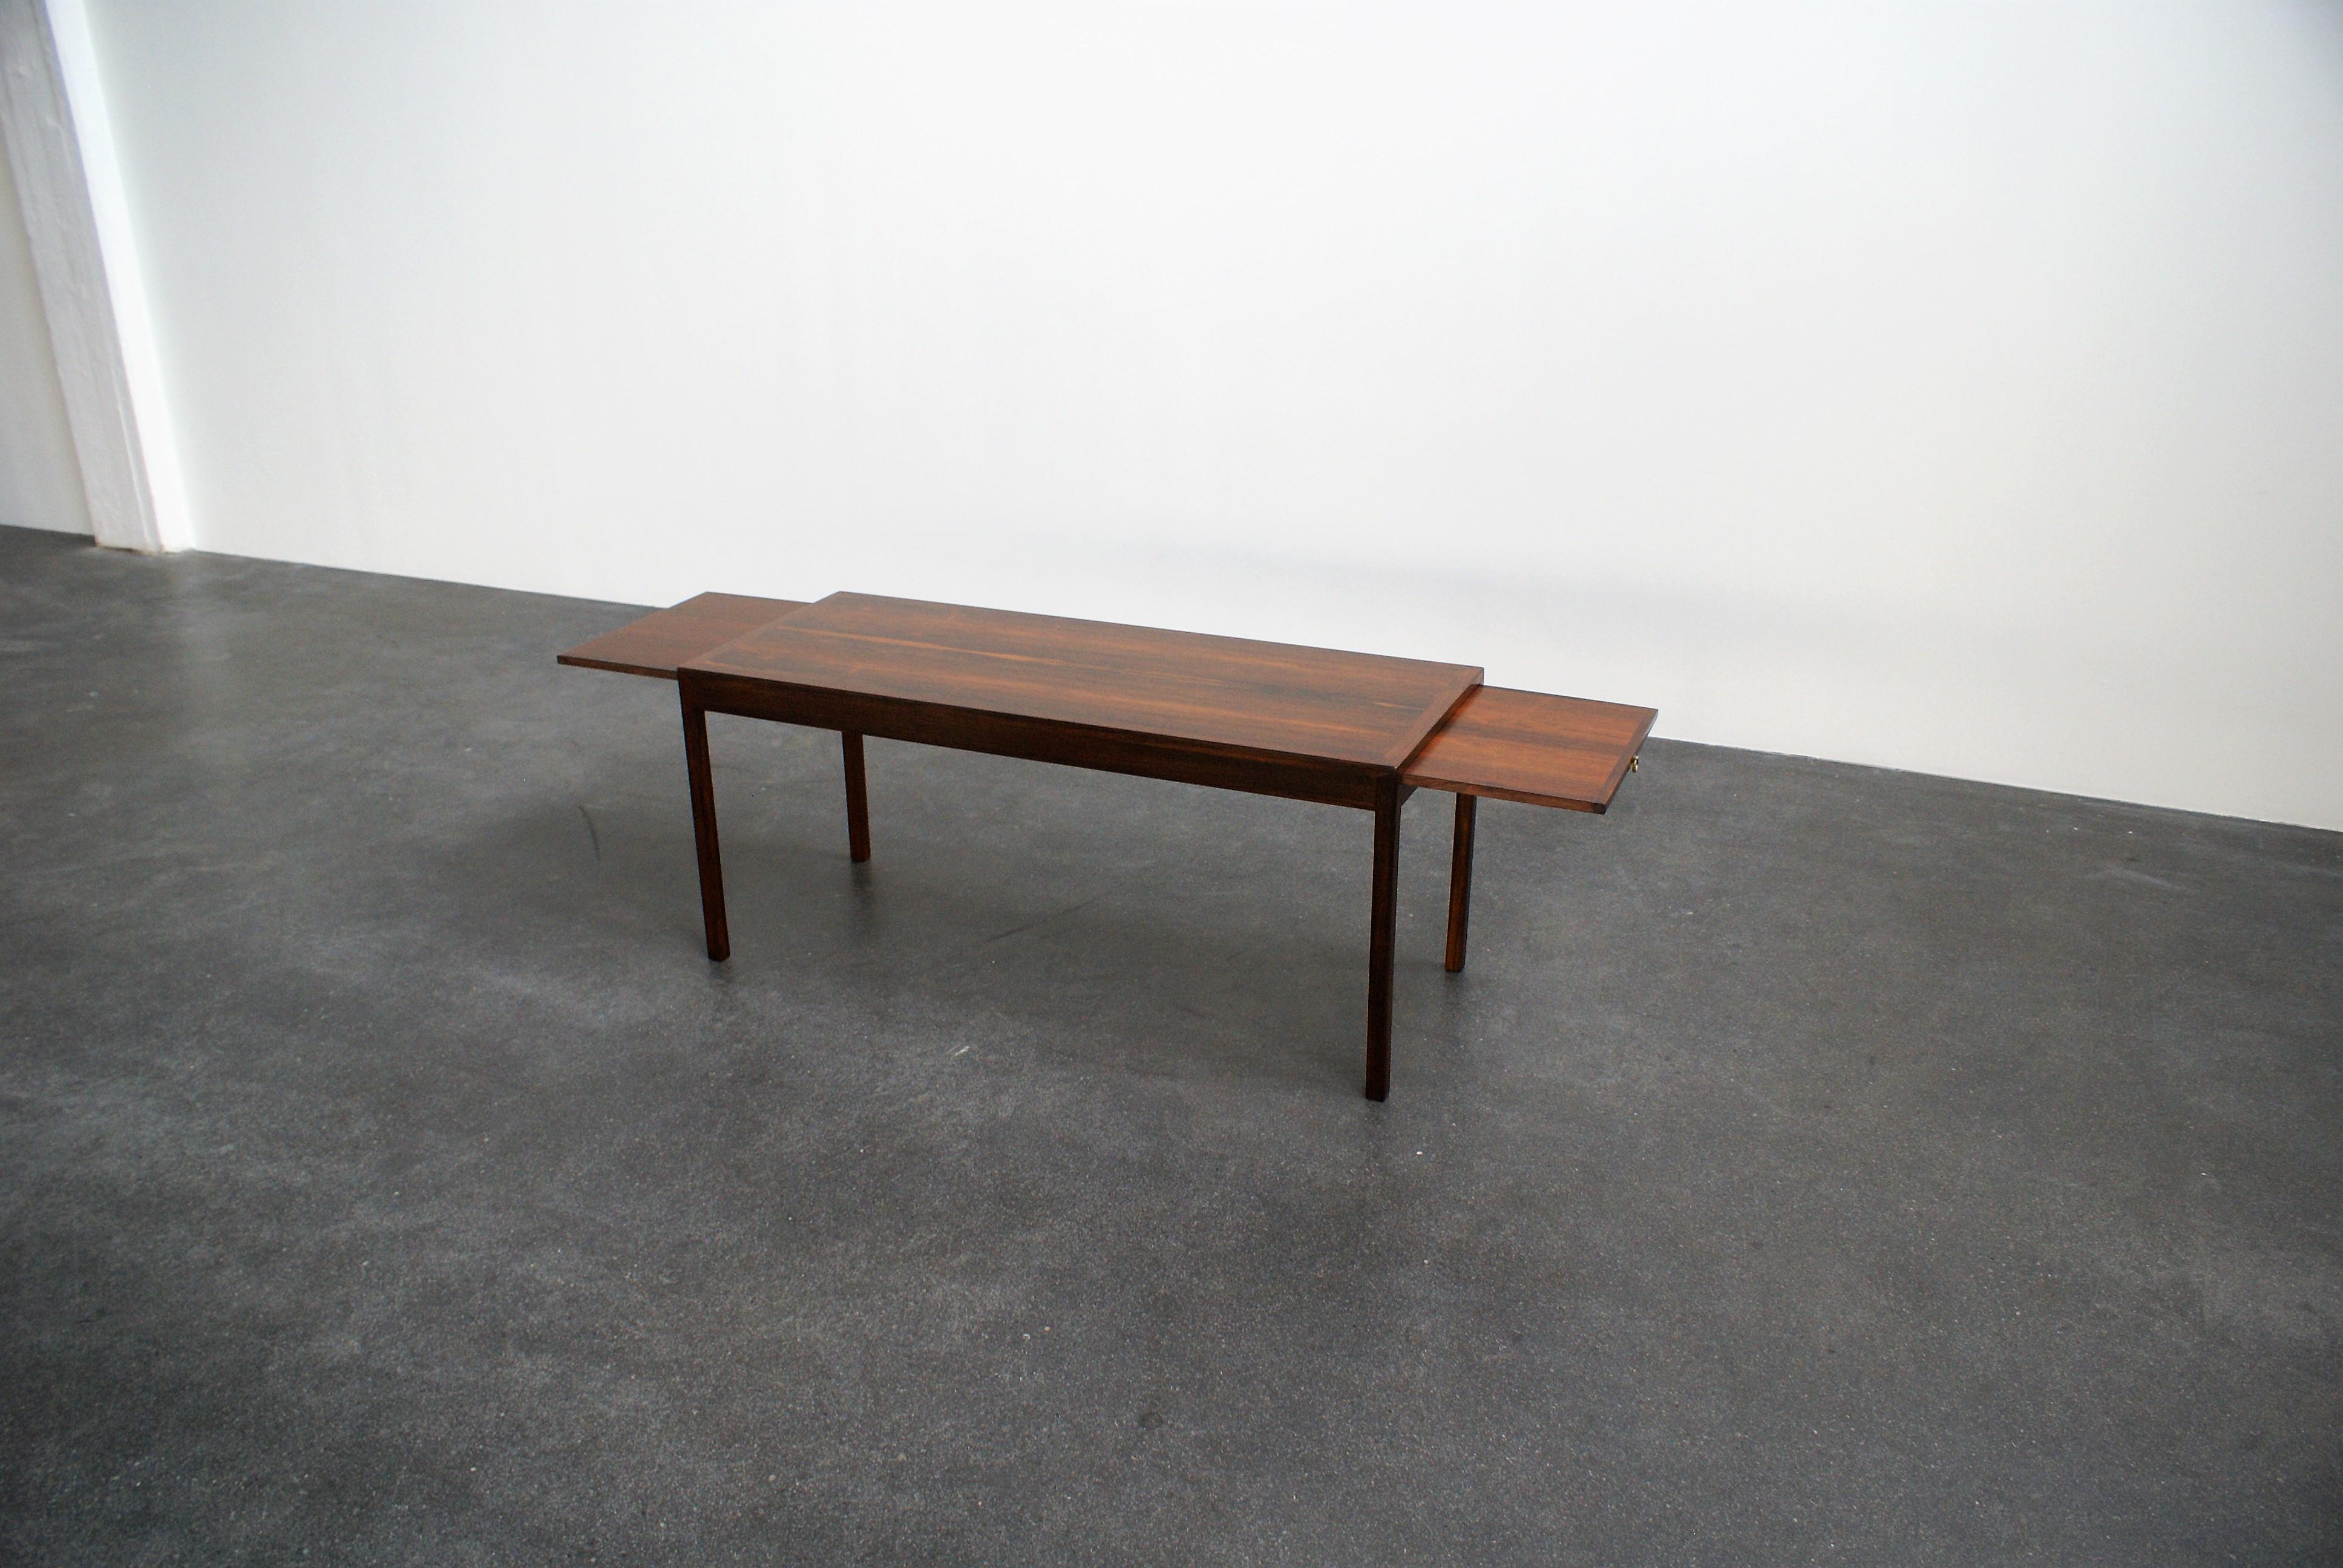 Ole Wanscher extendable low table in Brazilian rosewood and brass. Extensions to both sides of the table with brass fittings. Executed by master cabinetmaker A. J. Iversen, Copenhagen, 1950s. Paper label from Iversen under the table